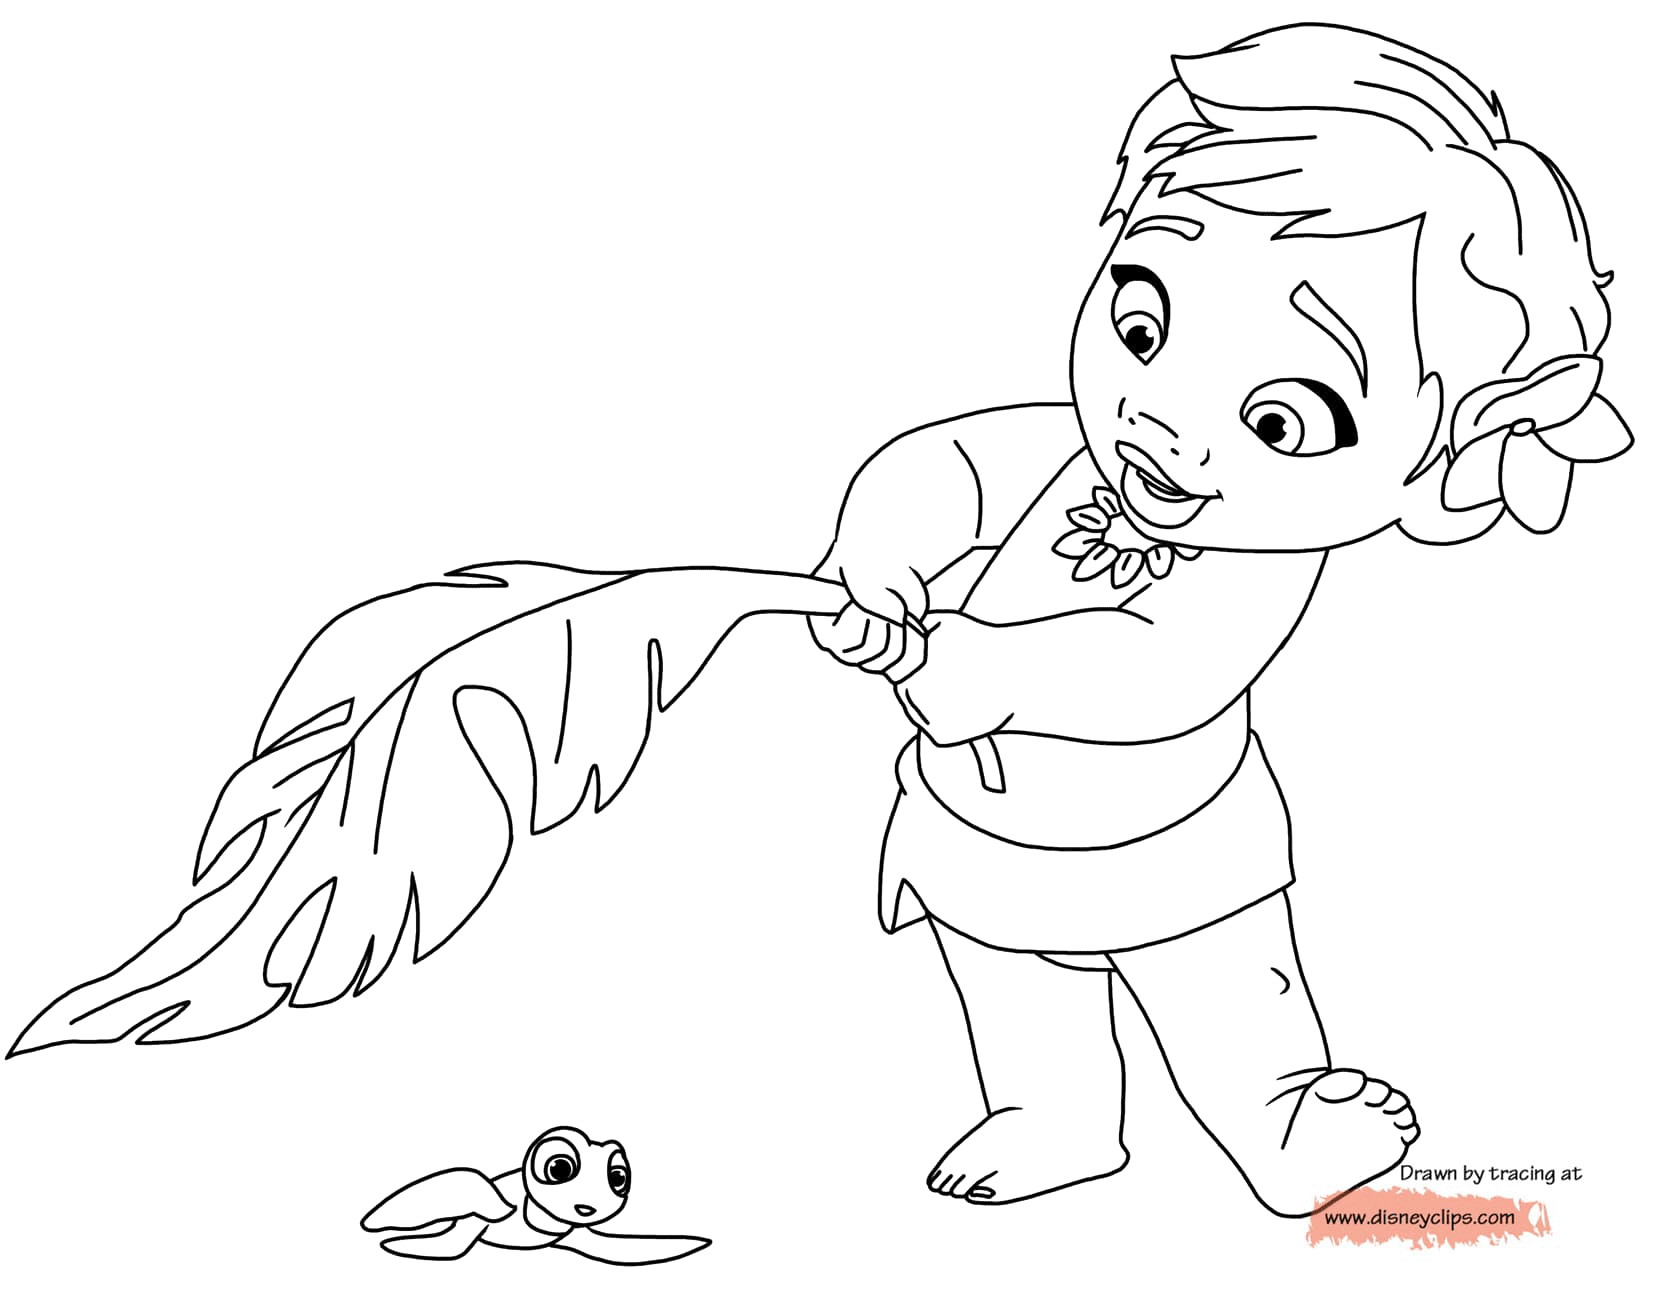 Disney's Moana Coloring Pages | Disneyclips.com